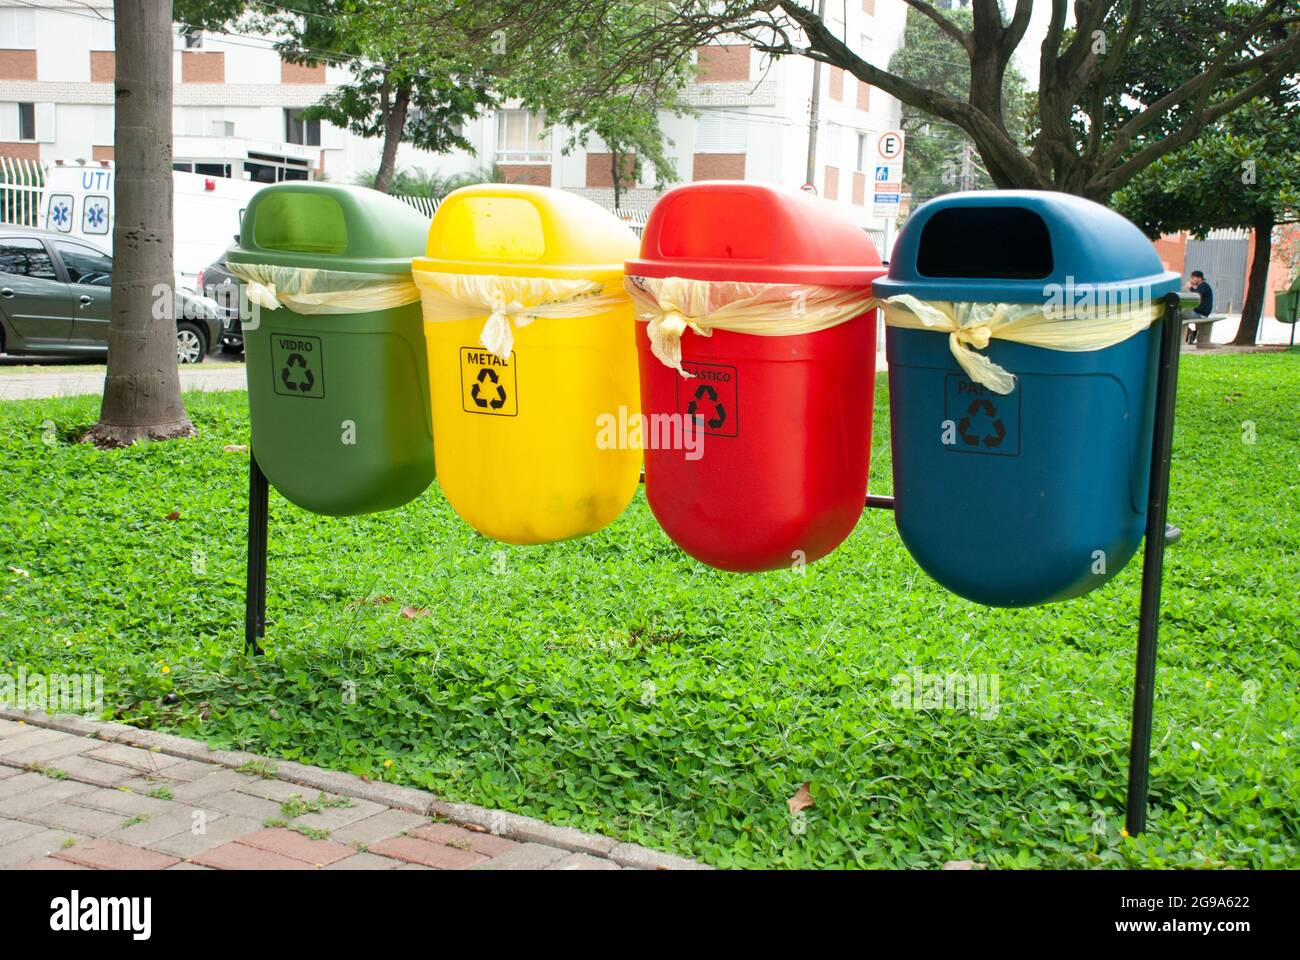 Garbage Trash Containers For Selective Rycyclable Collection Stock Photo,  Picture and Royalty Free Image. Image 92275188.